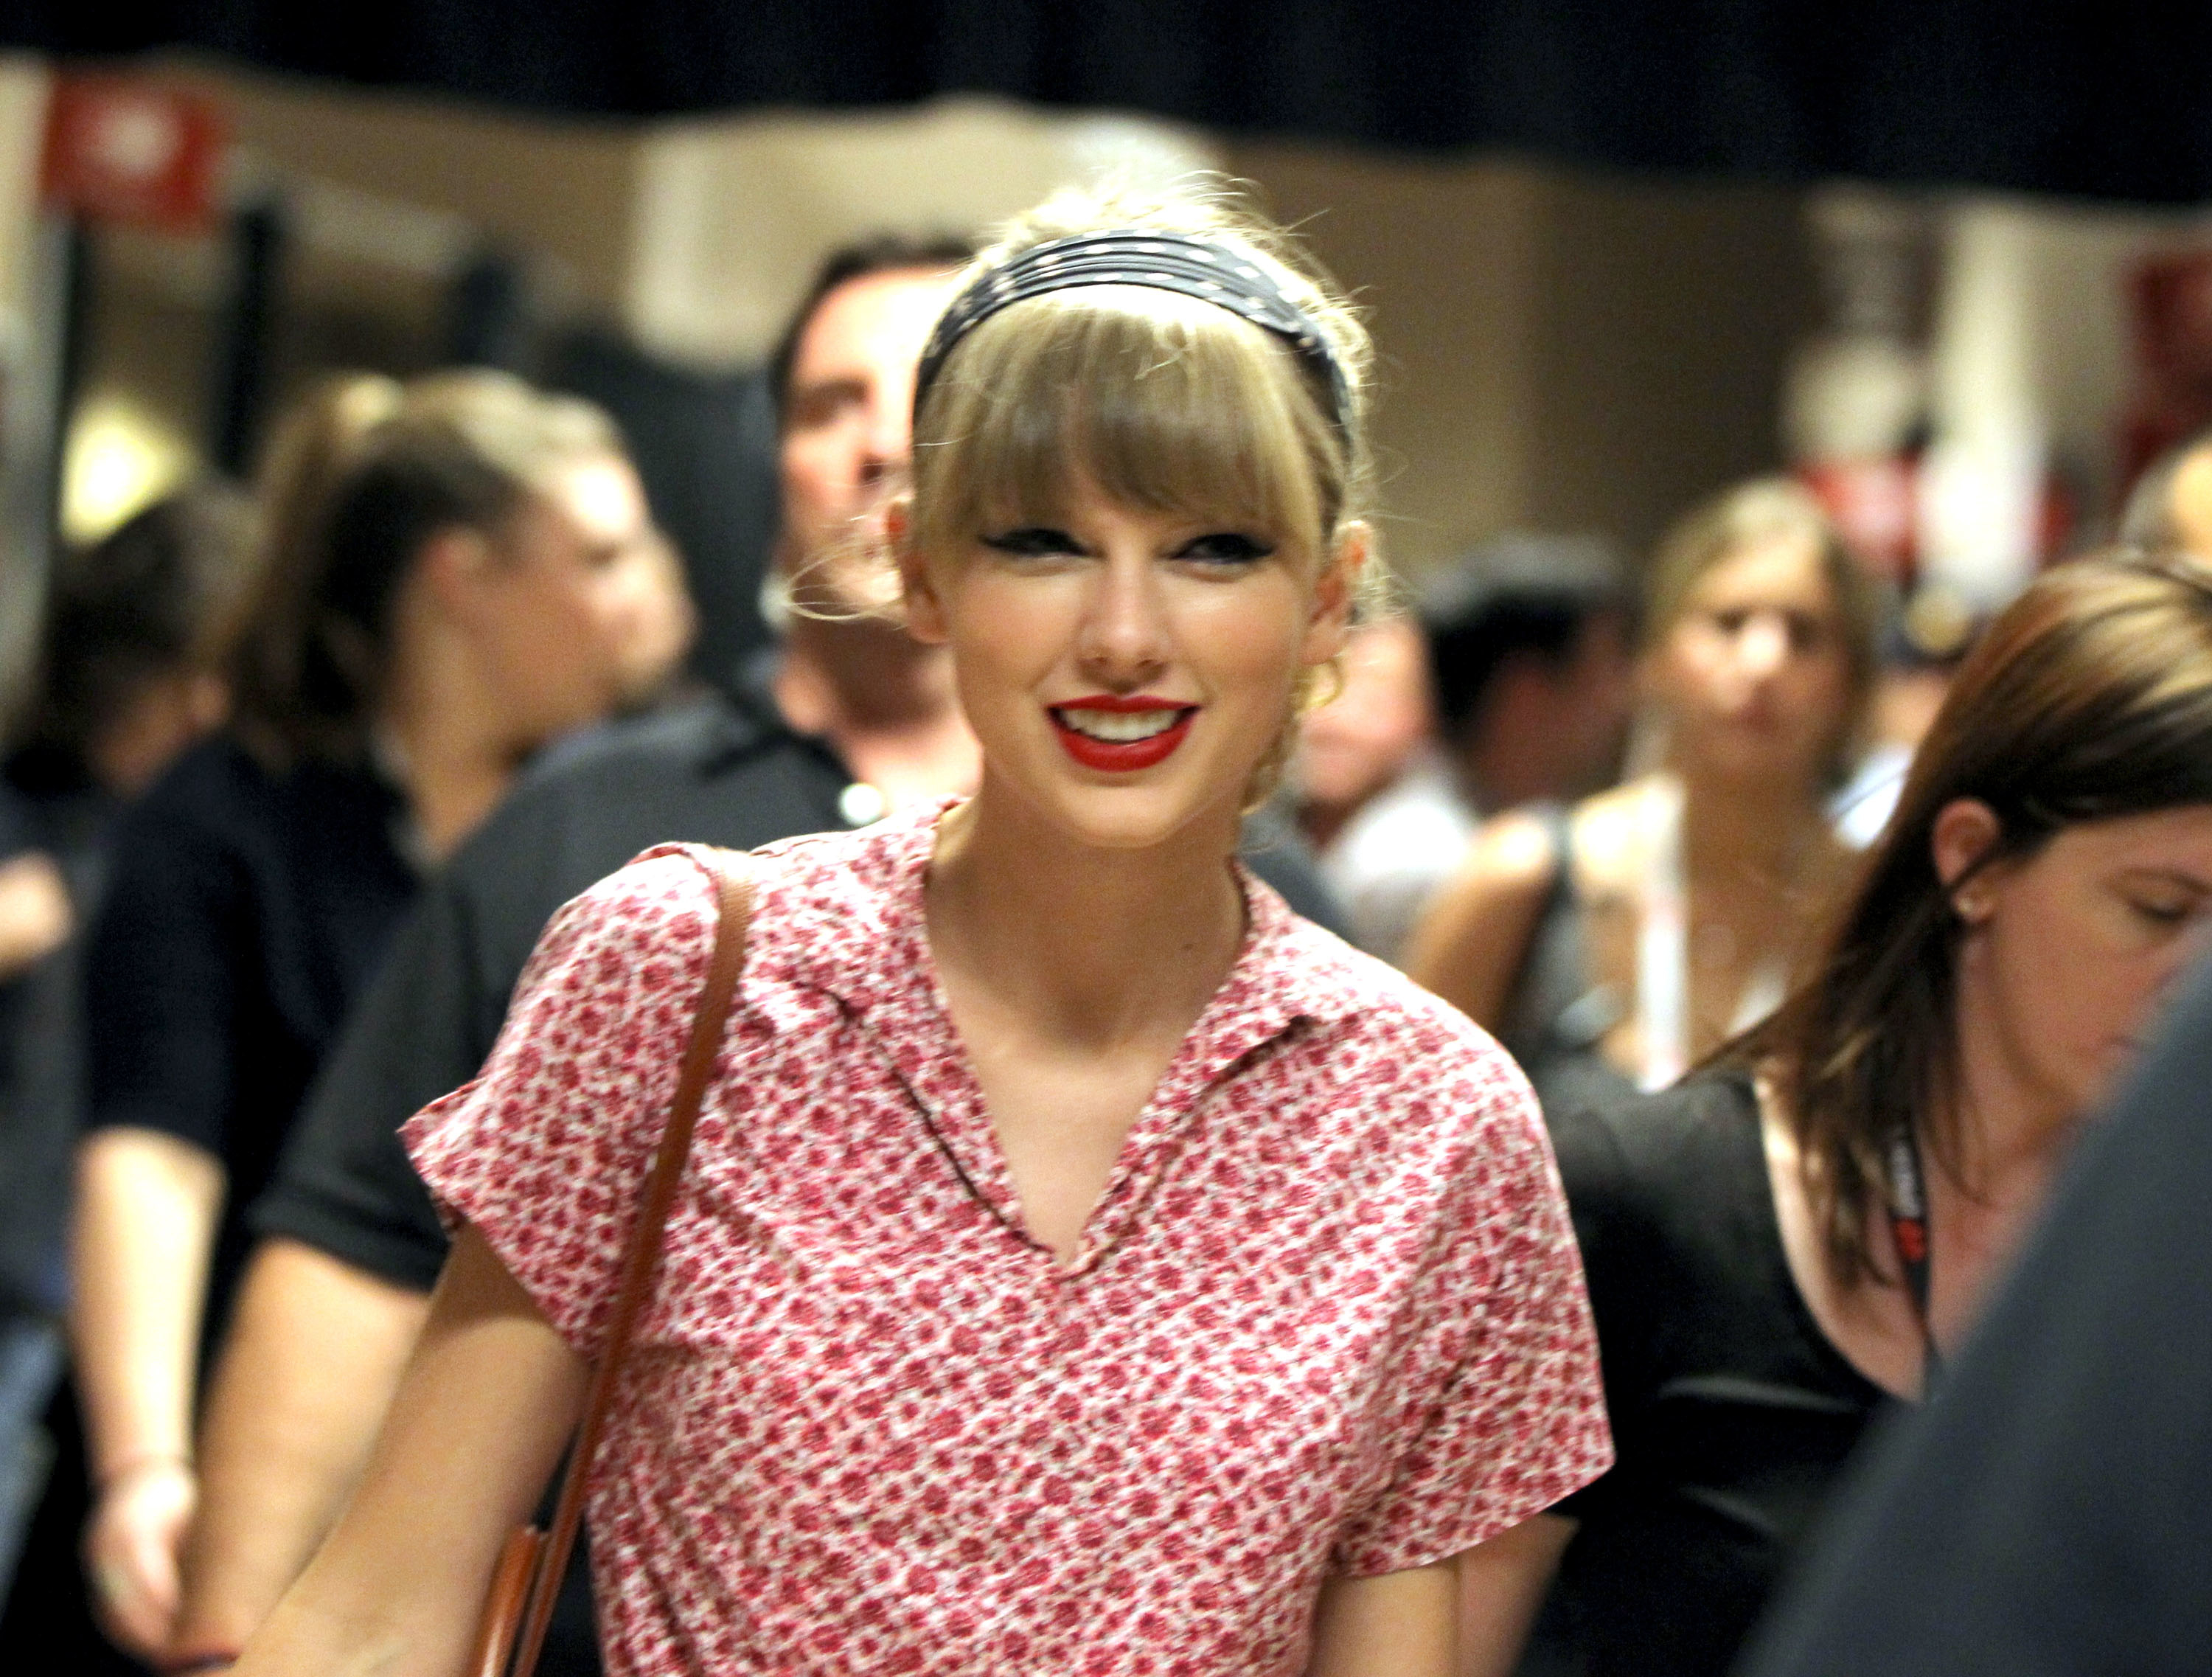 Close-up of Taylor smiling and wearing a short-sleeved blouse